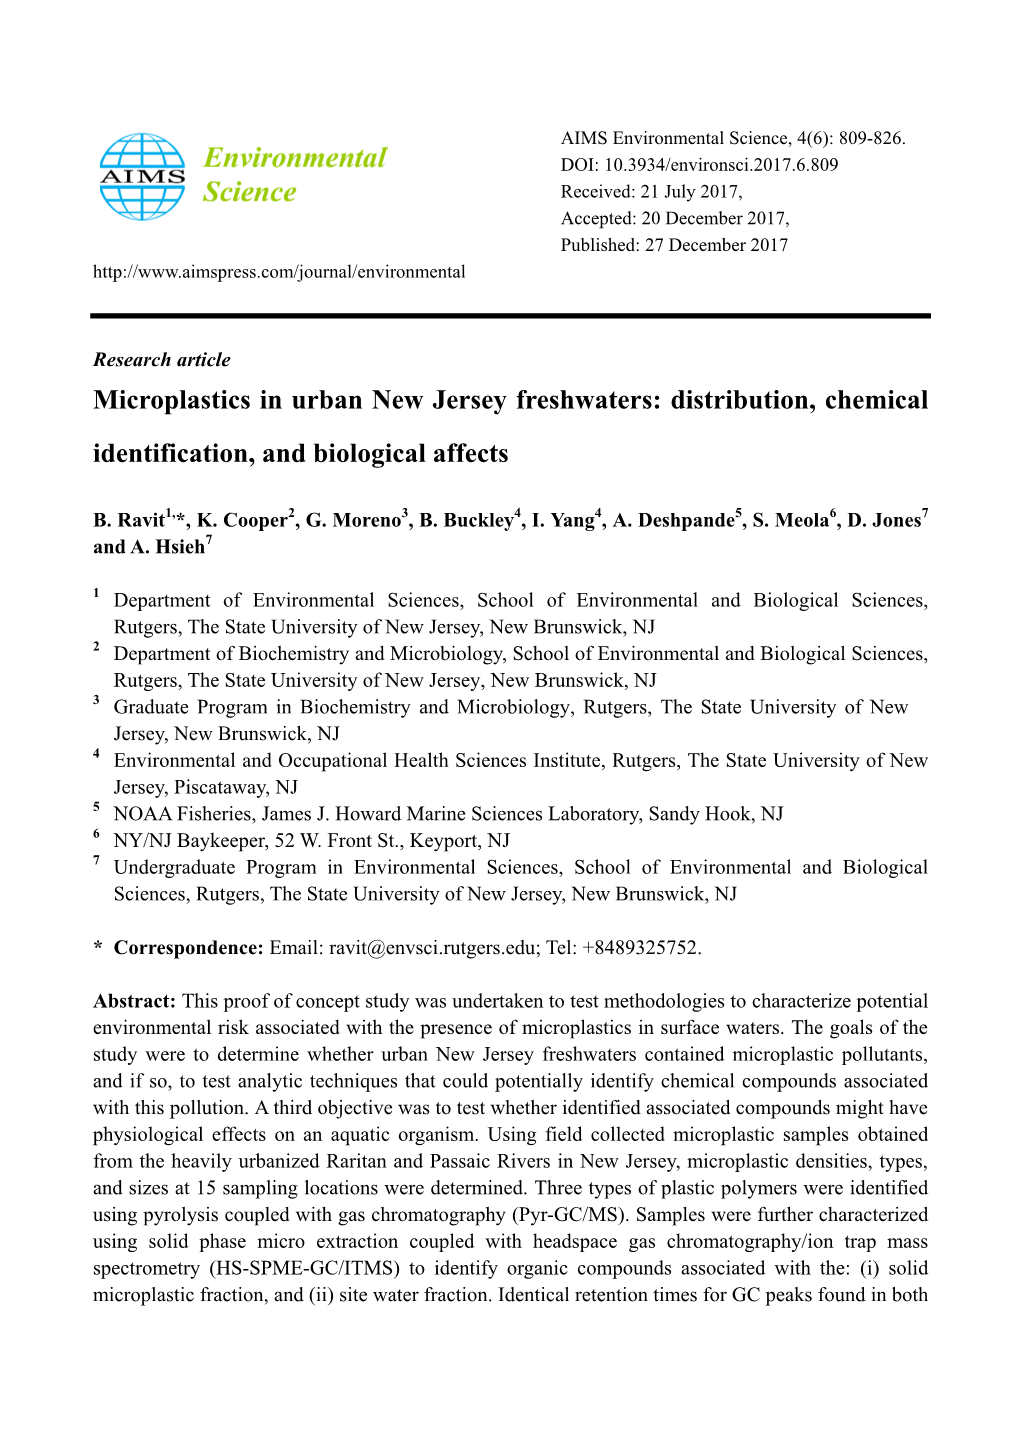 Microplastics in Urban New Jersey Freshwaters: Distribution, Chemical Identification, and Biological Affects